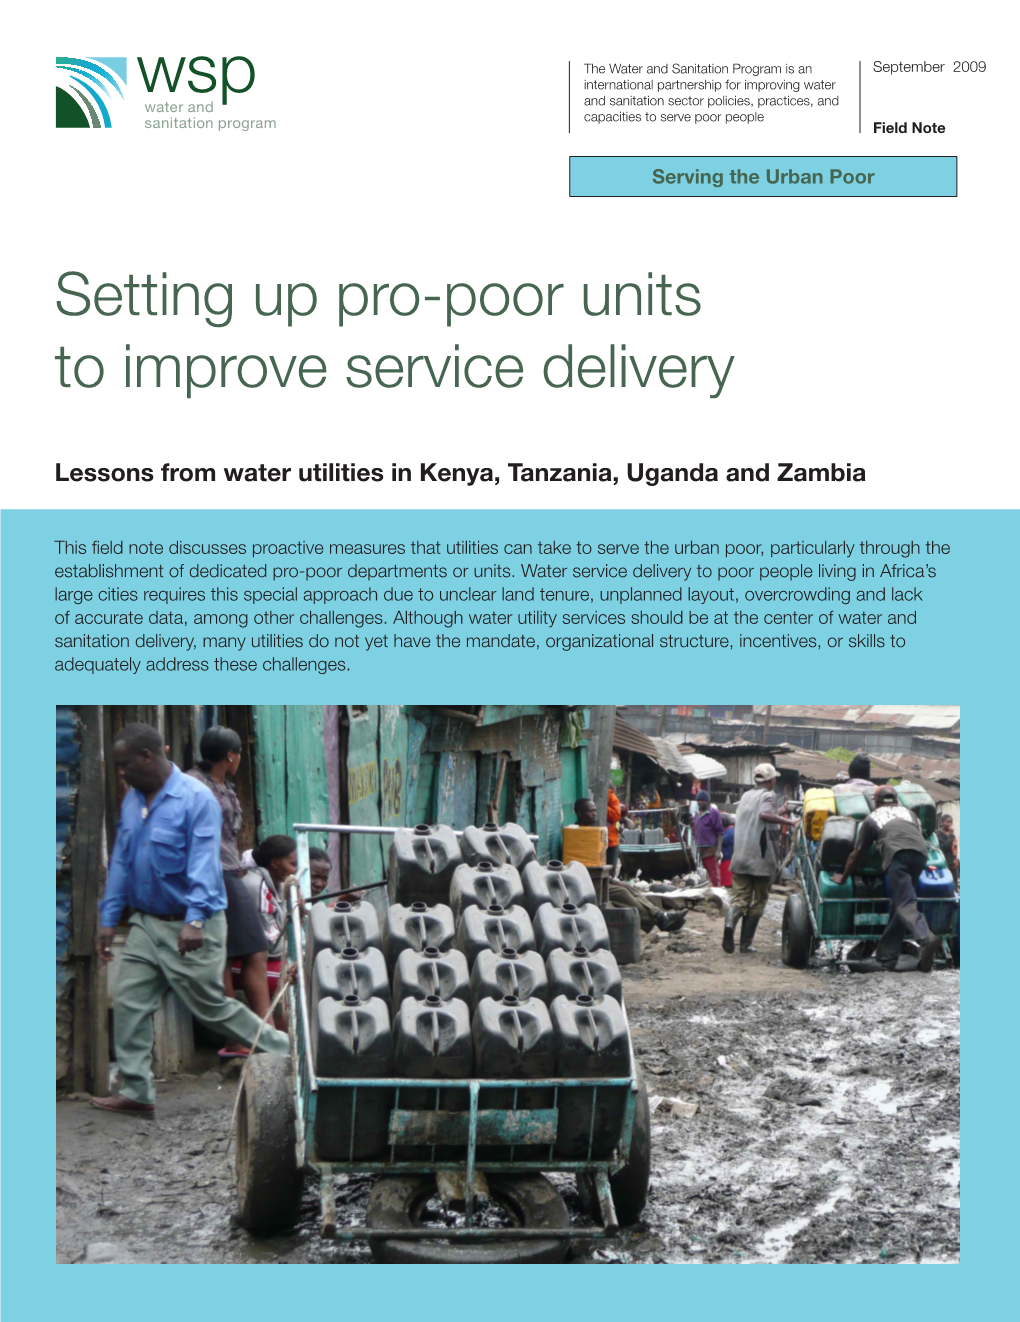 Setting up Pro-Poor Units to Improve Service Delivery